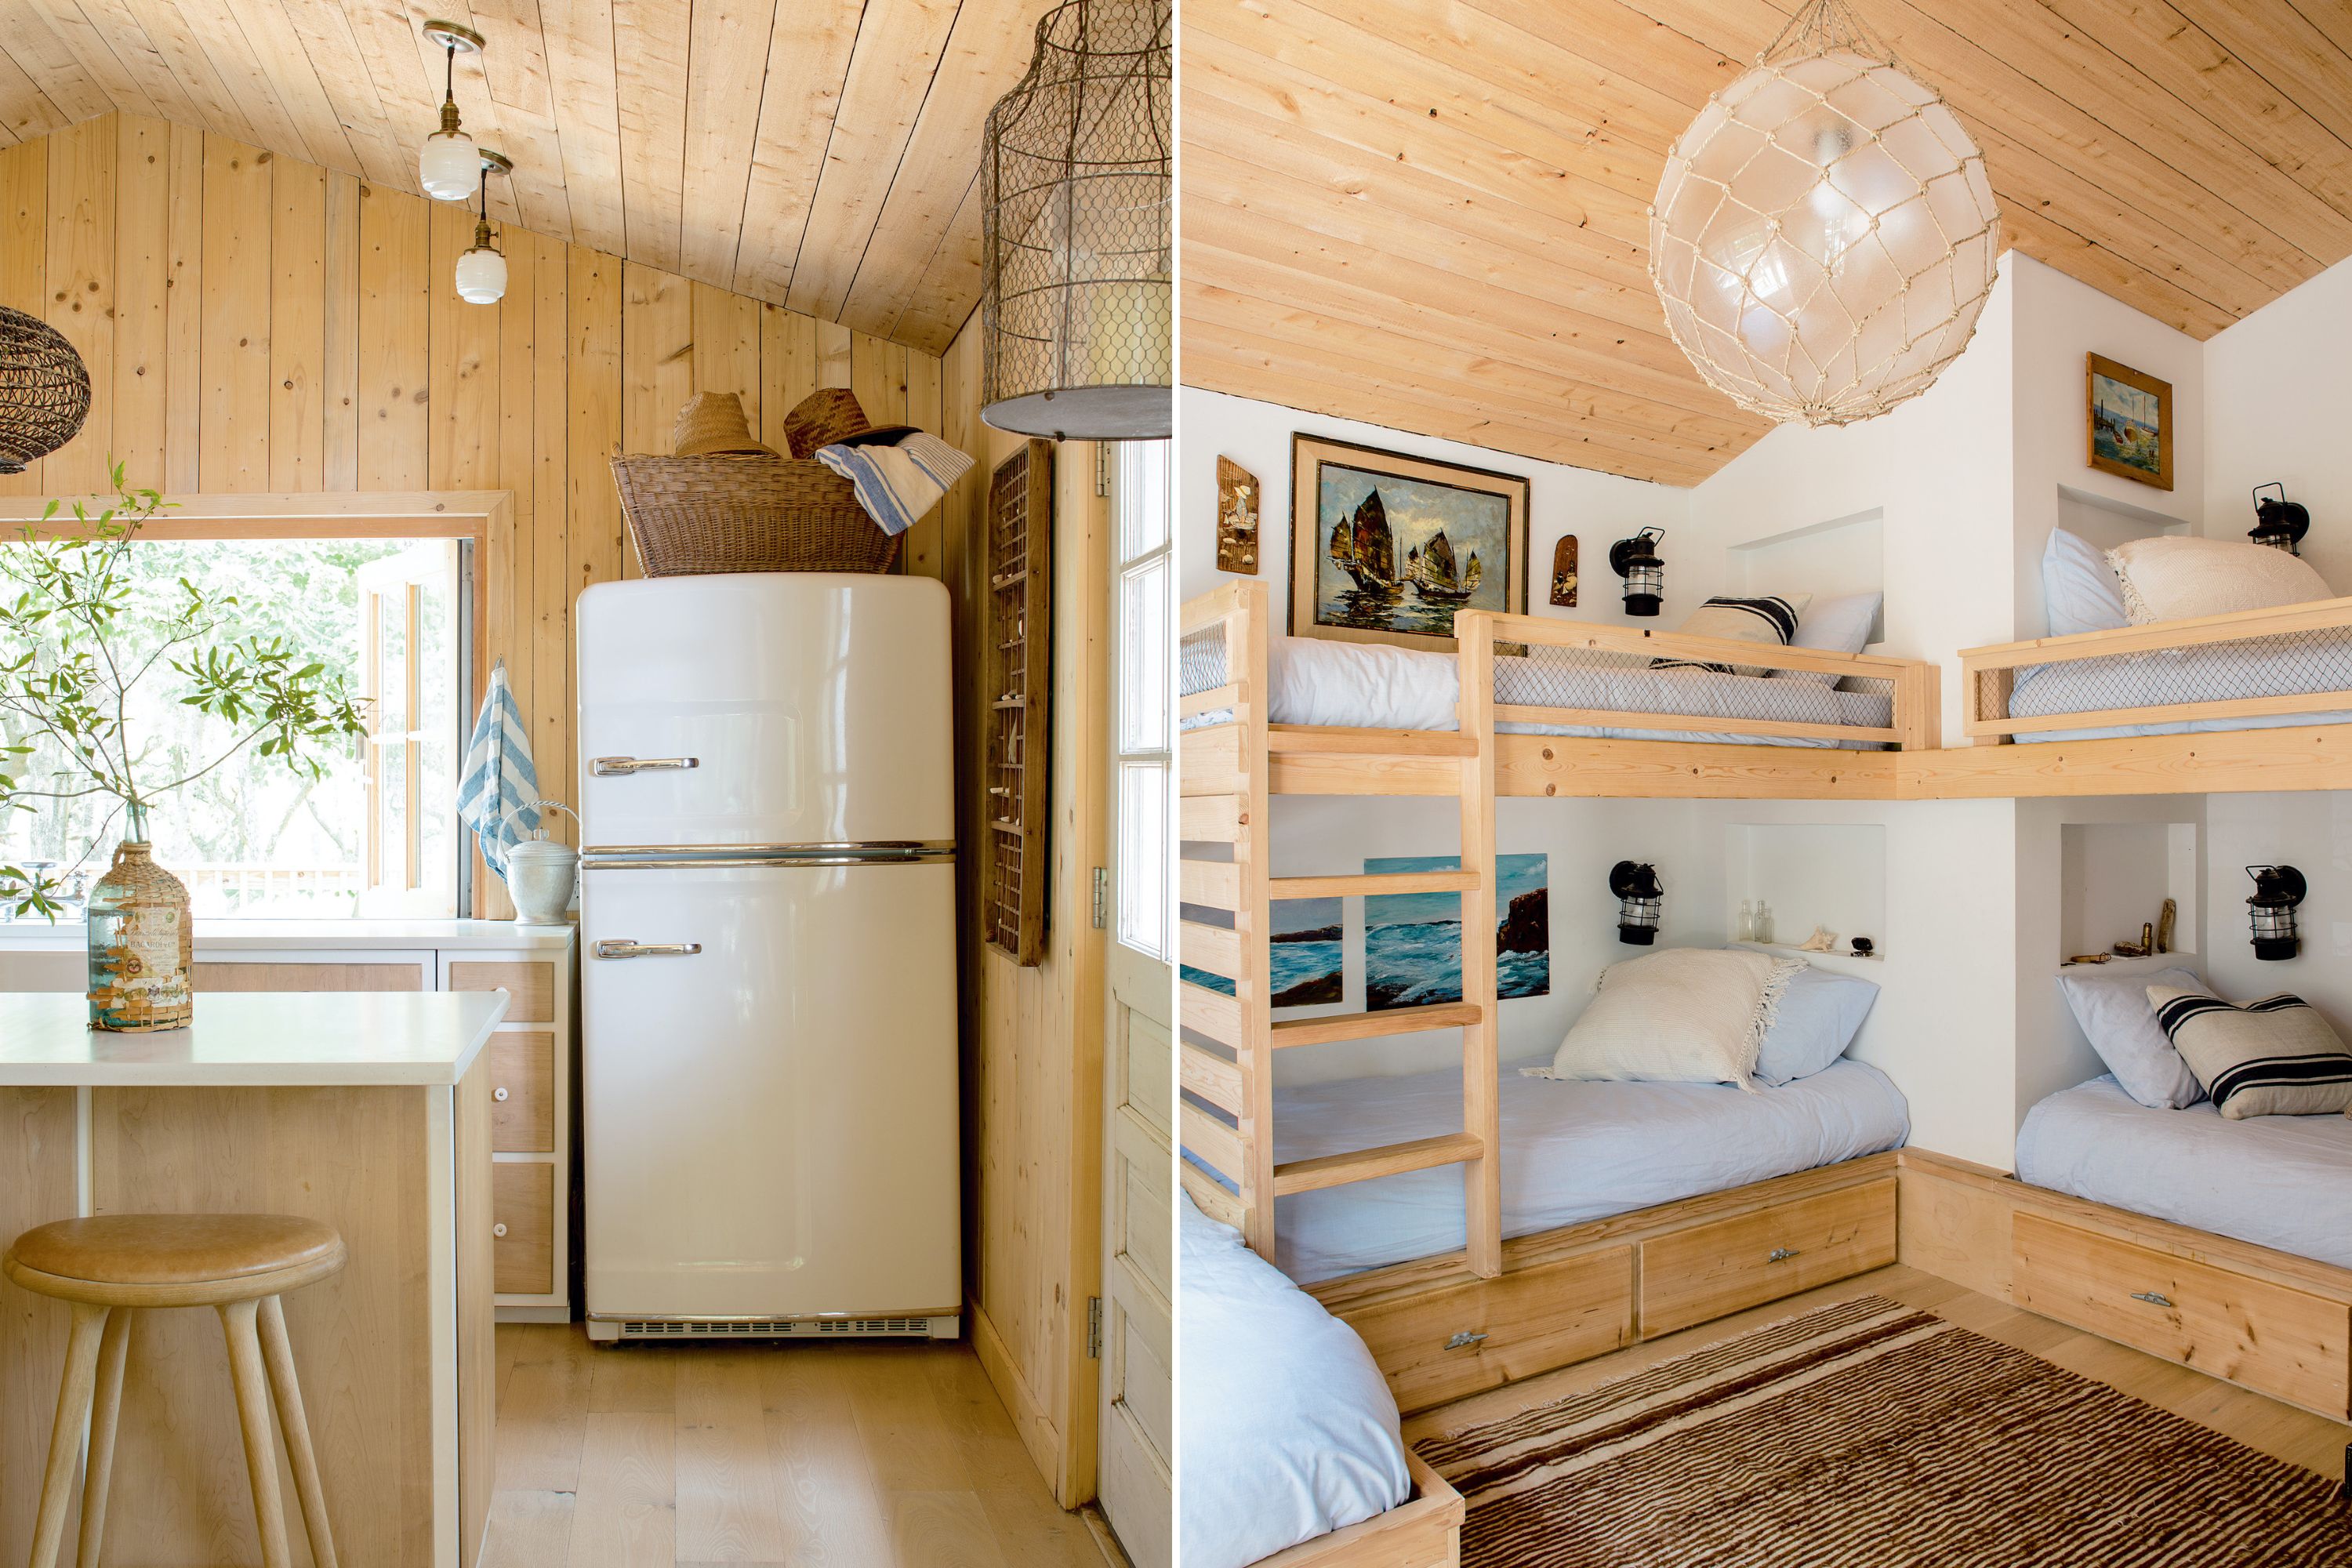 A wood kitchen with a white fridge; A bunk bedroom with a wood ceiling and bed frames